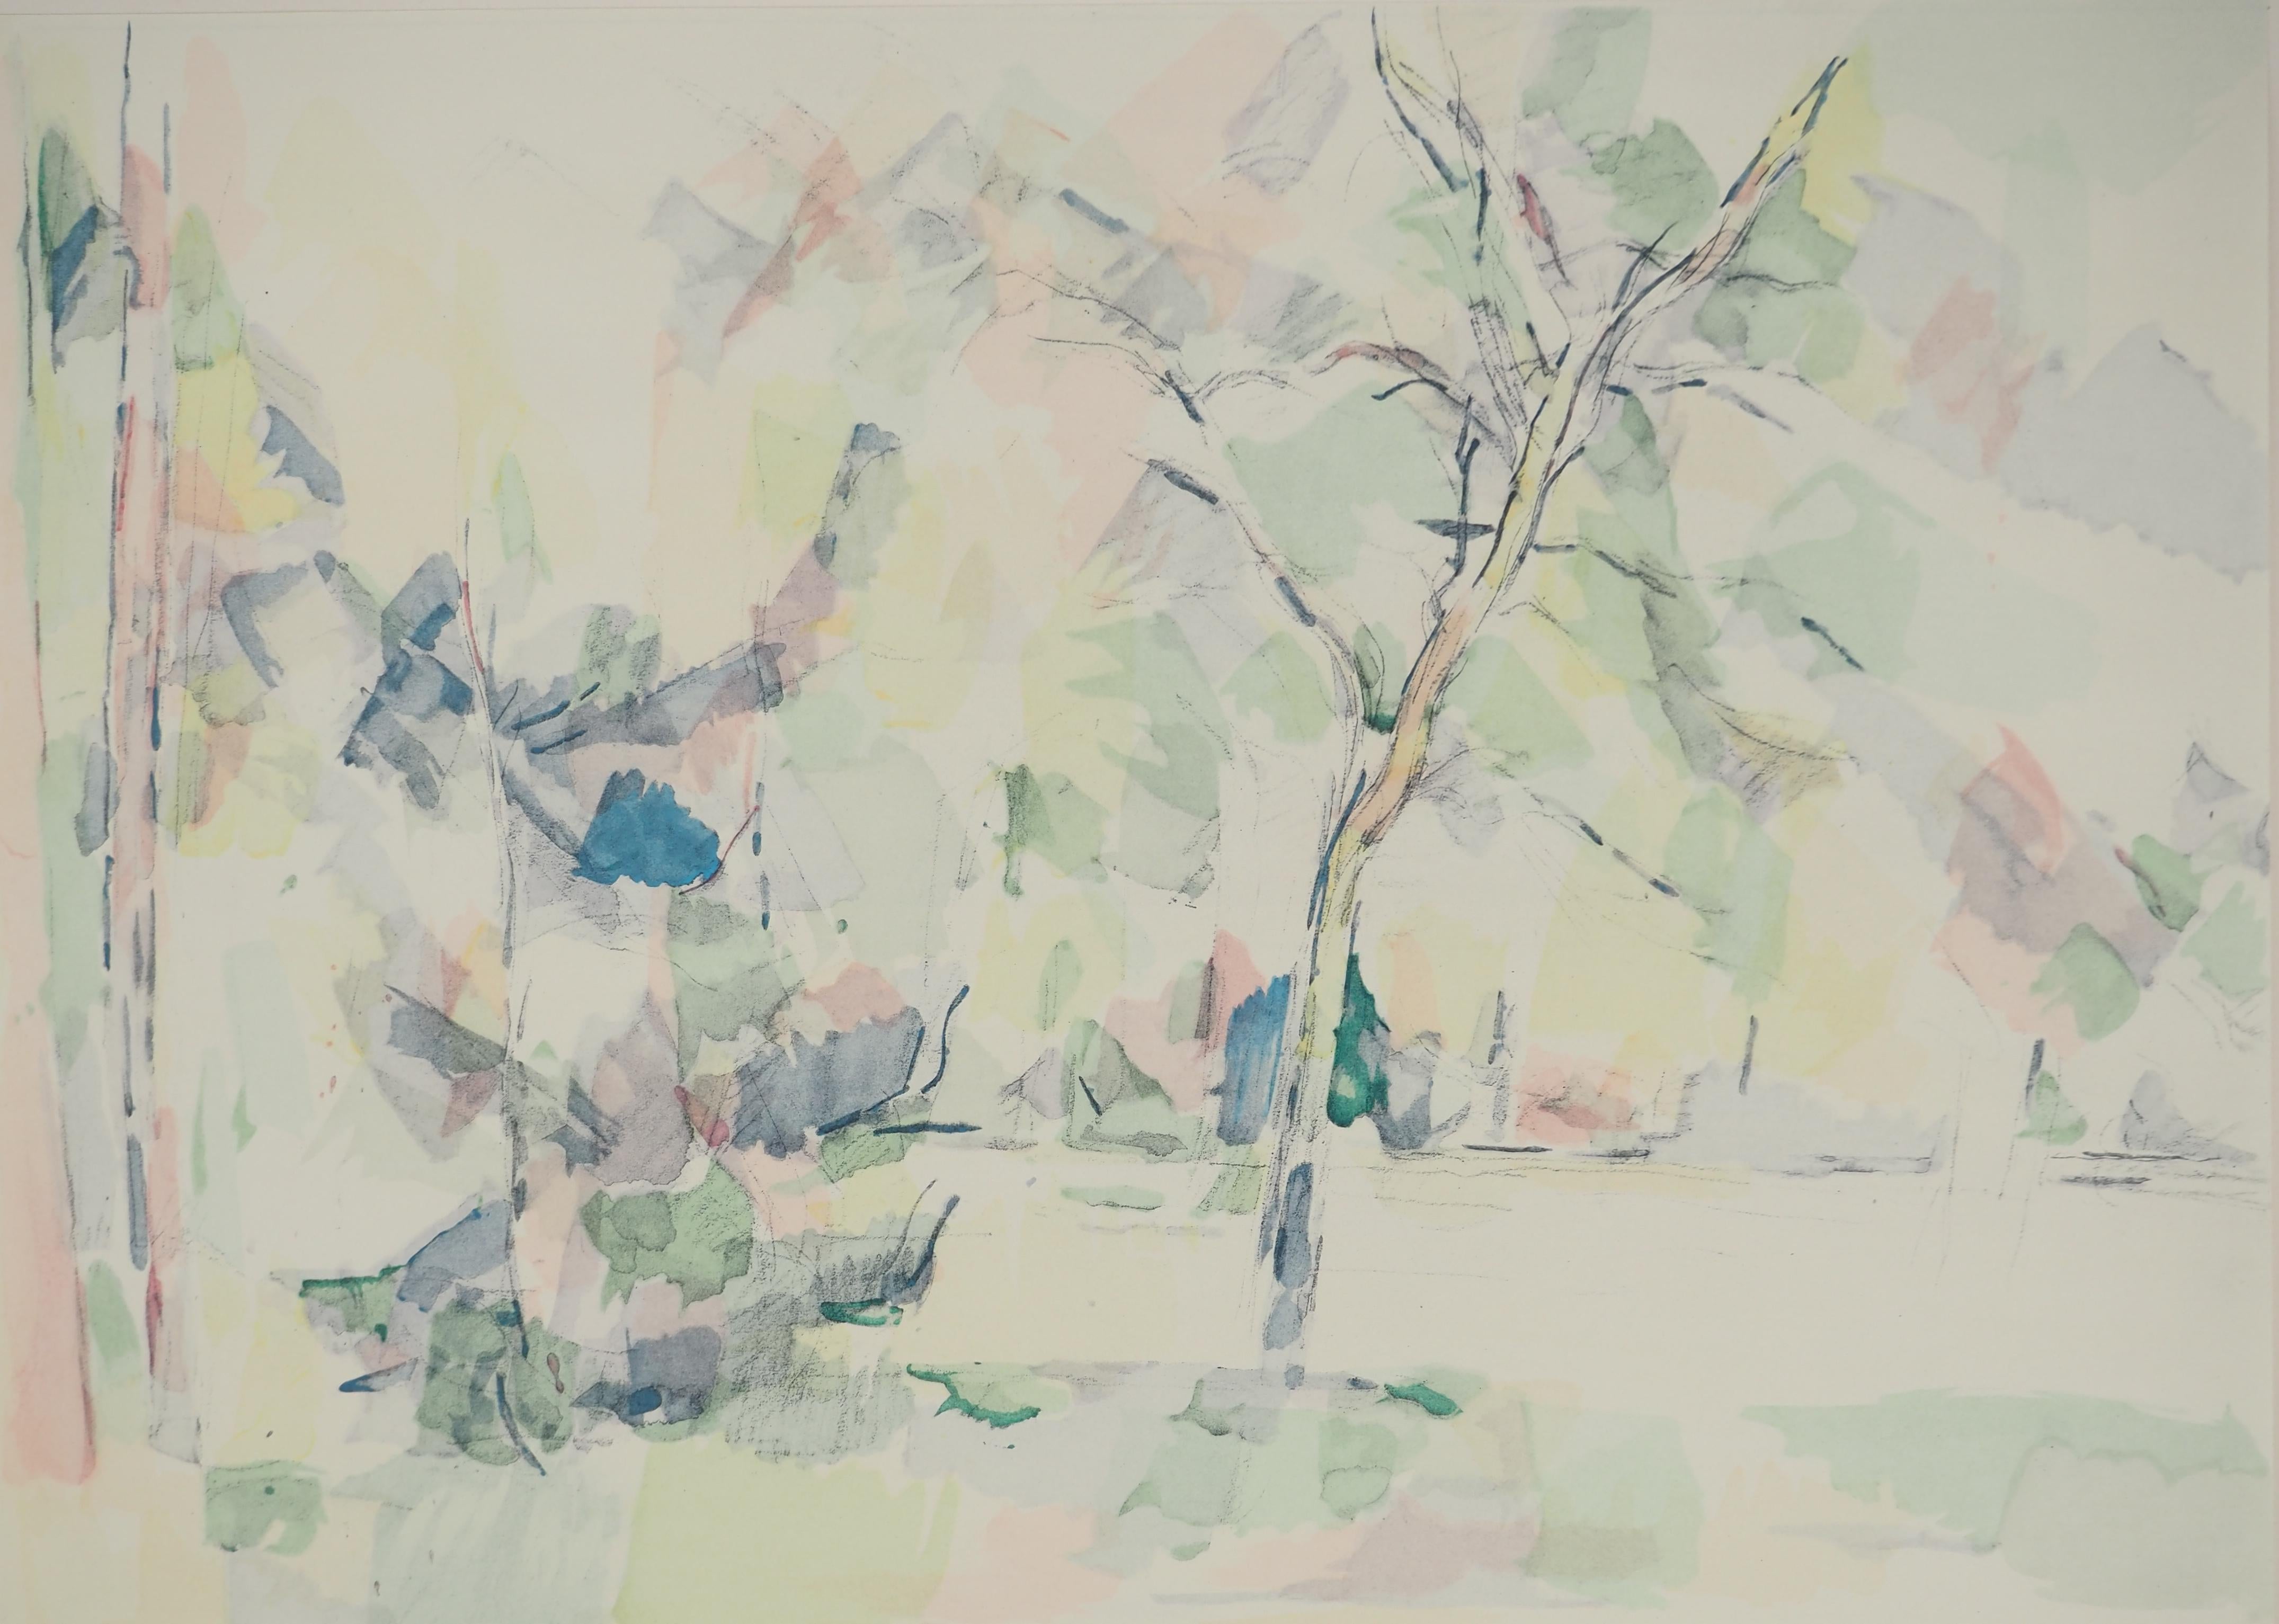 Provence, Into the woods - Lithograph, 1971 - Print by Paul Cézanne